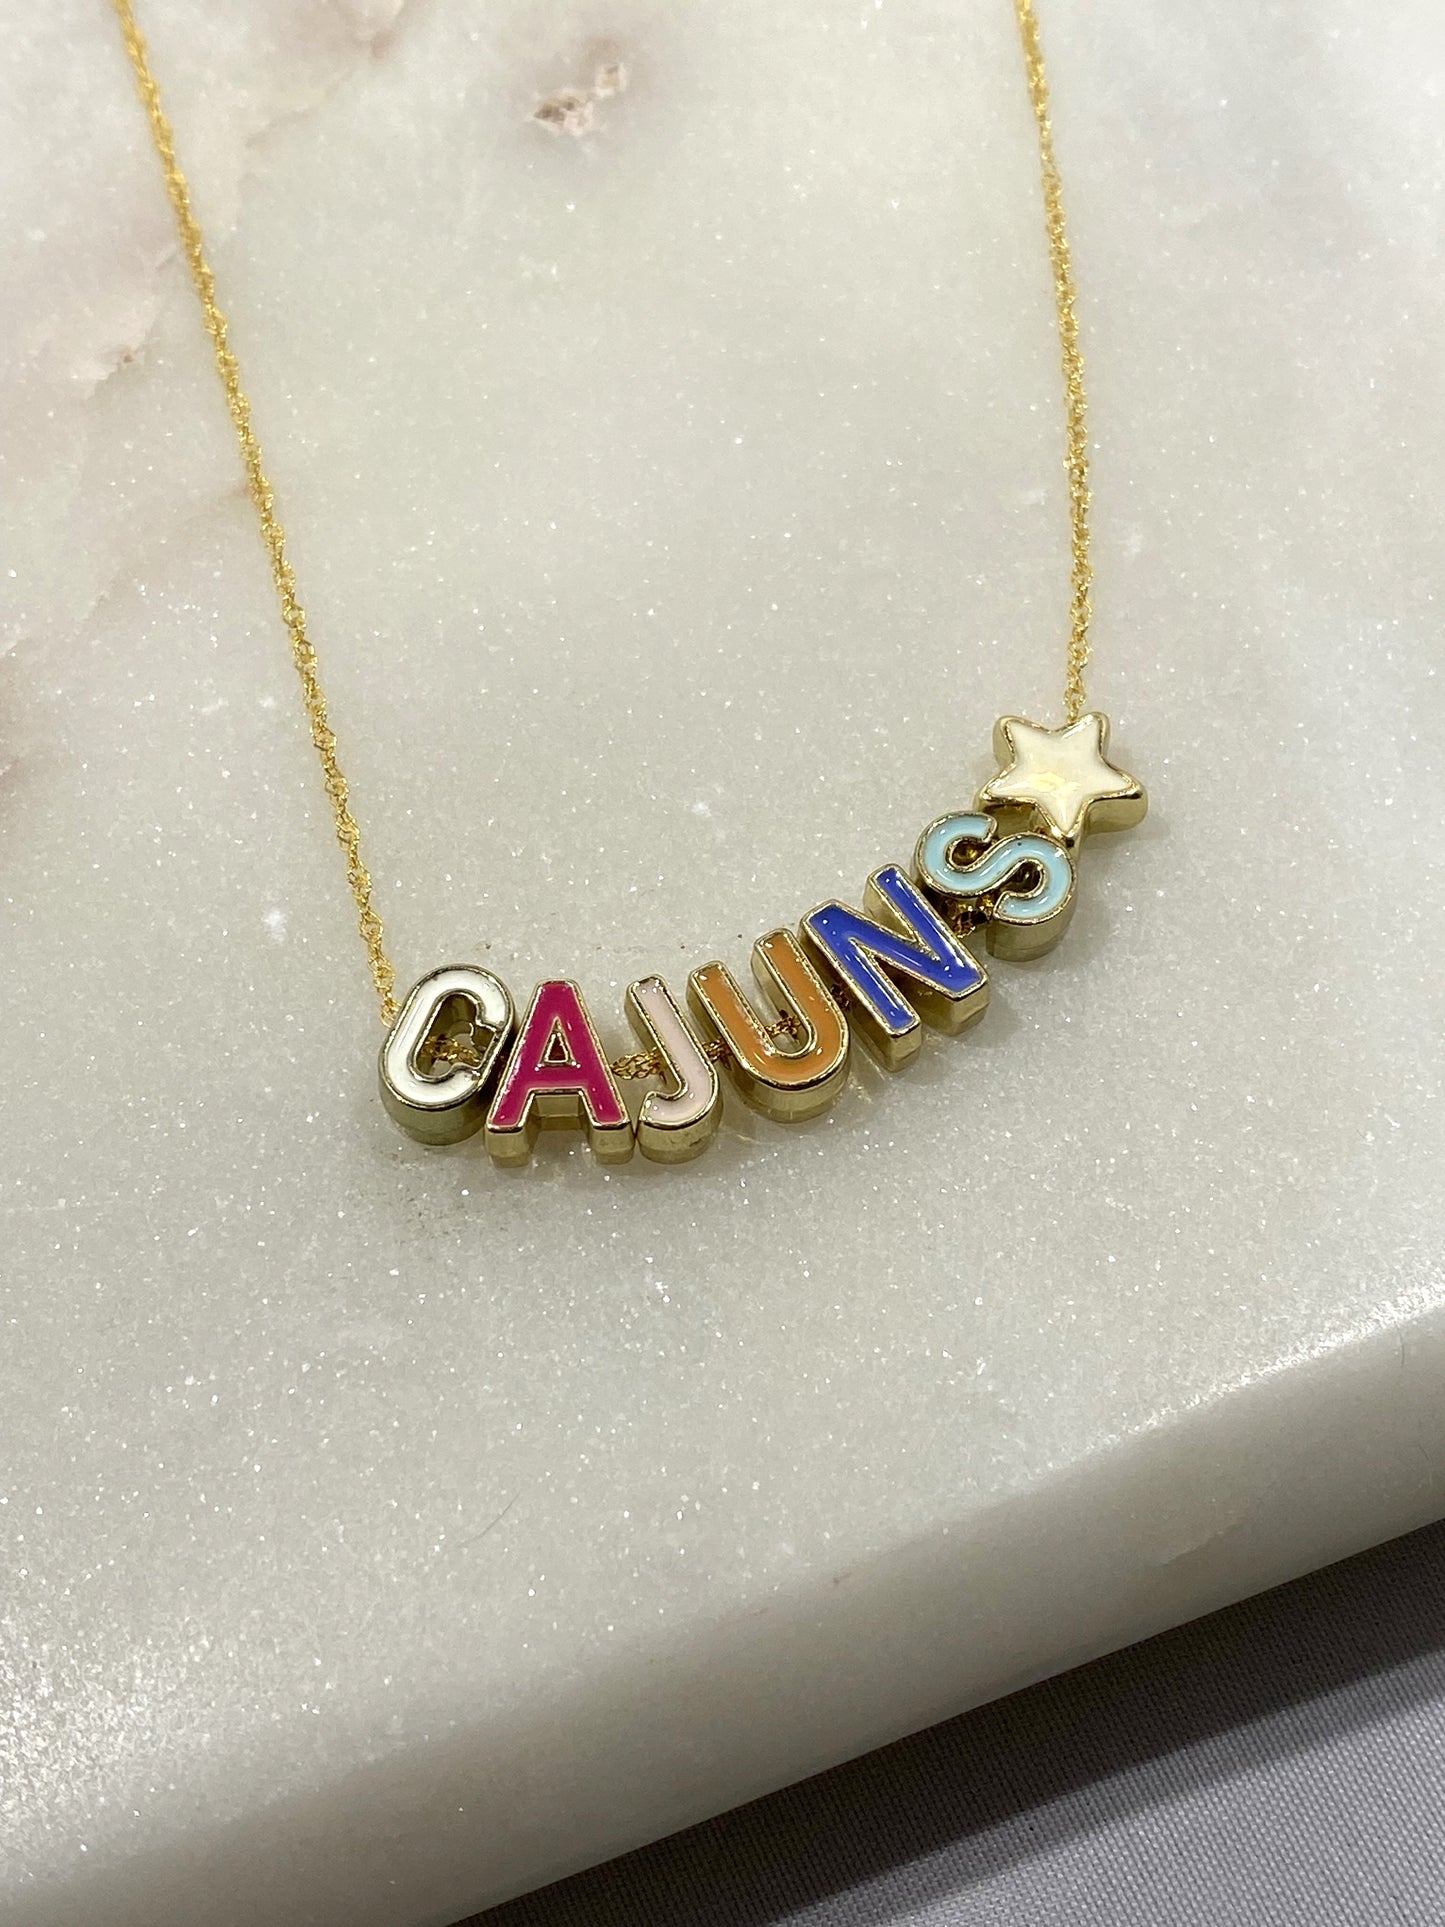 PERSONALIZED NECKLACES